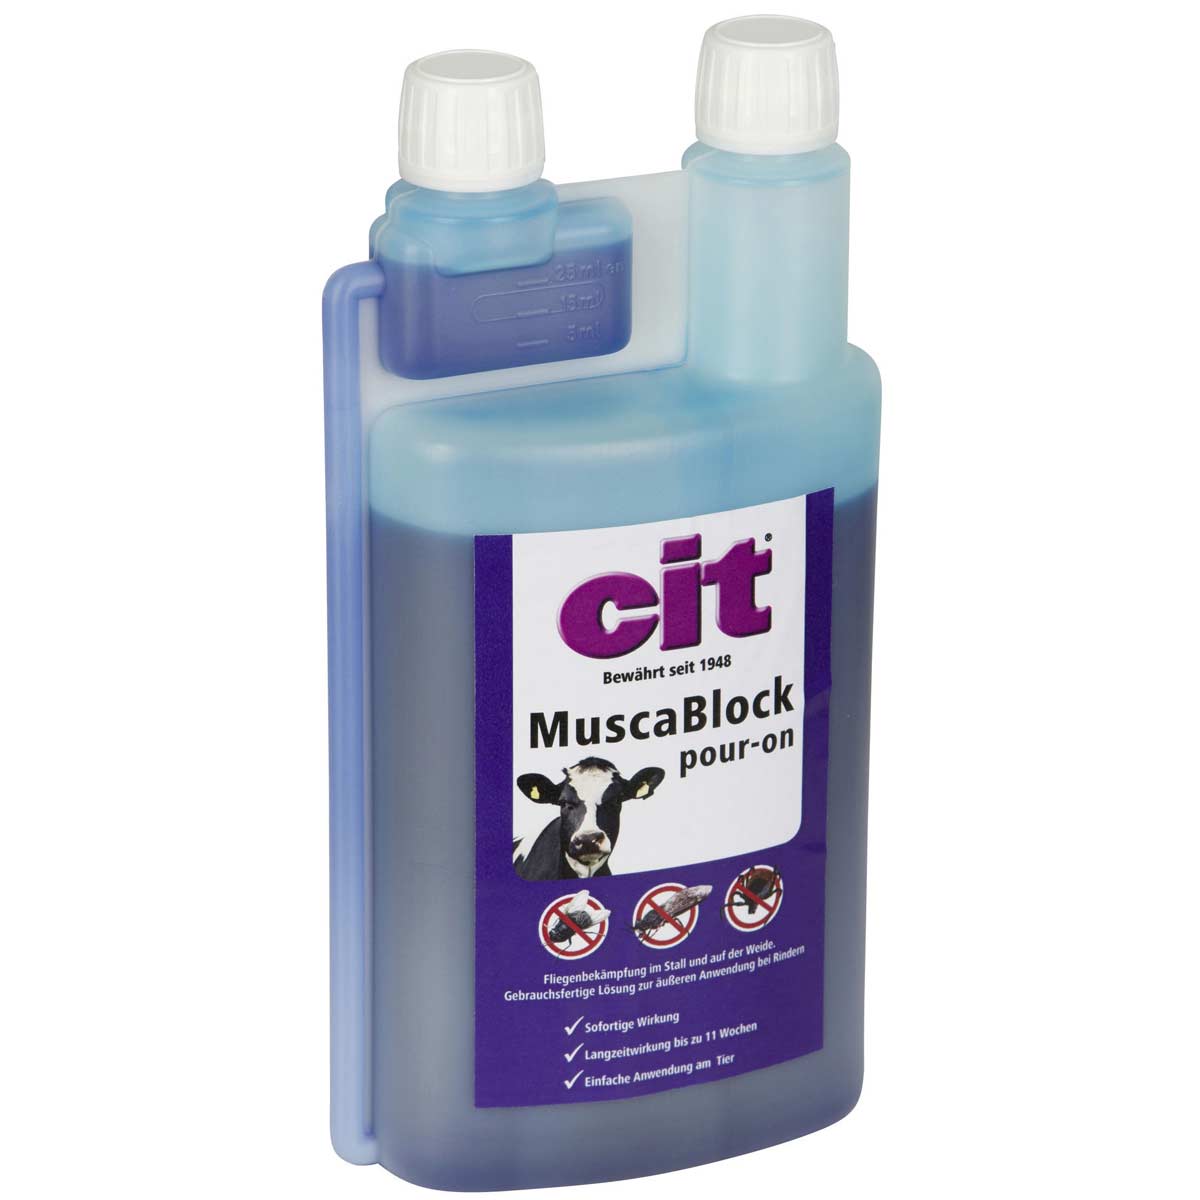 MuscaBlock pour-on